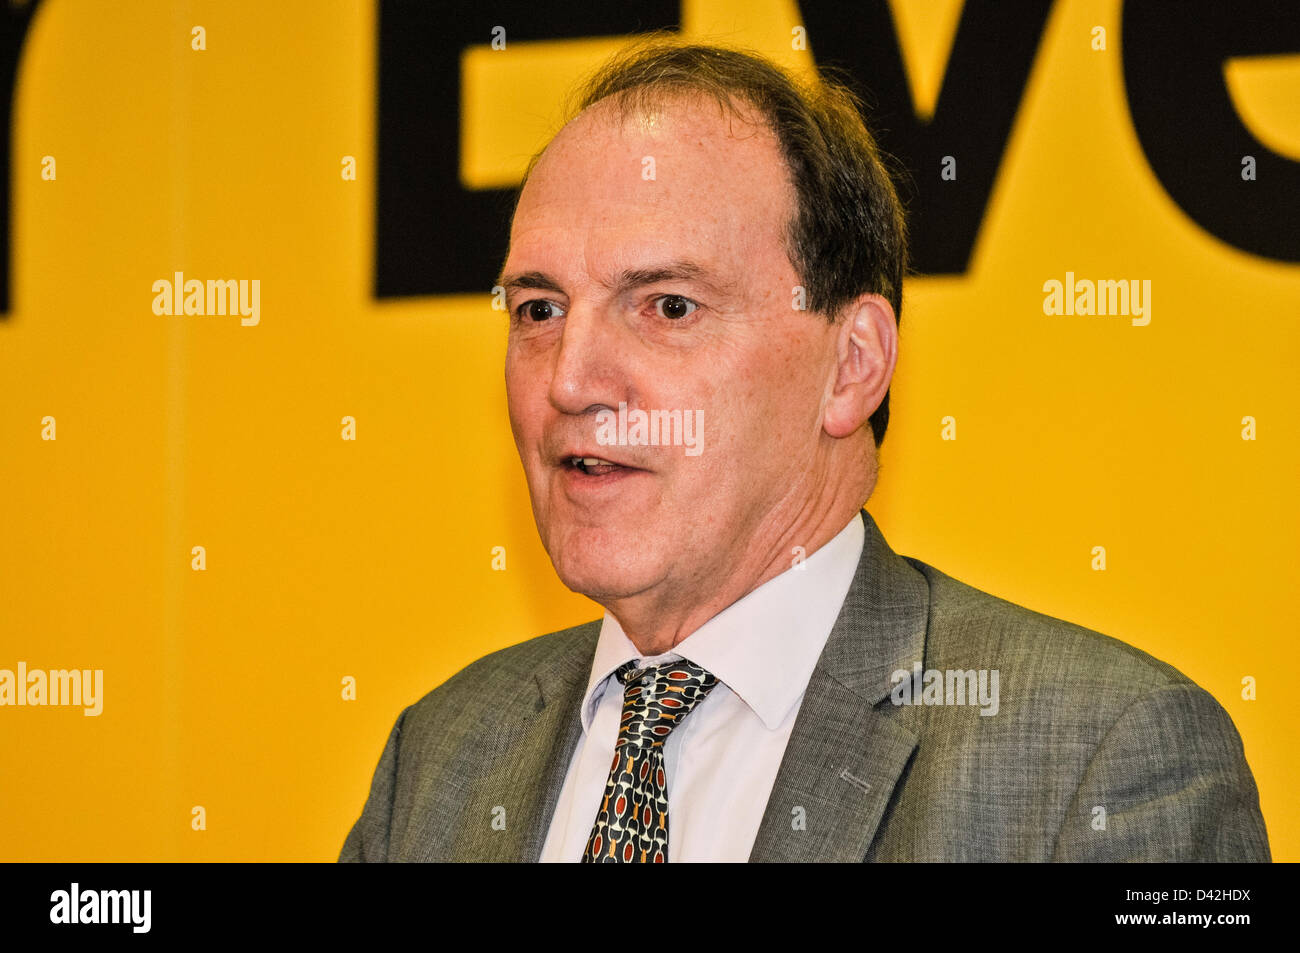 Belfast, Northern Ireland. 2nd March 2013. Simon Hughes, Member of Parliament for  Bermondsey and Old Southwark, and Deputy Leader of the Liberal Democratic Party, addresses the Alliance Party Conference. Credit: Stephen Barnes/Alamy Live News Stock Photo